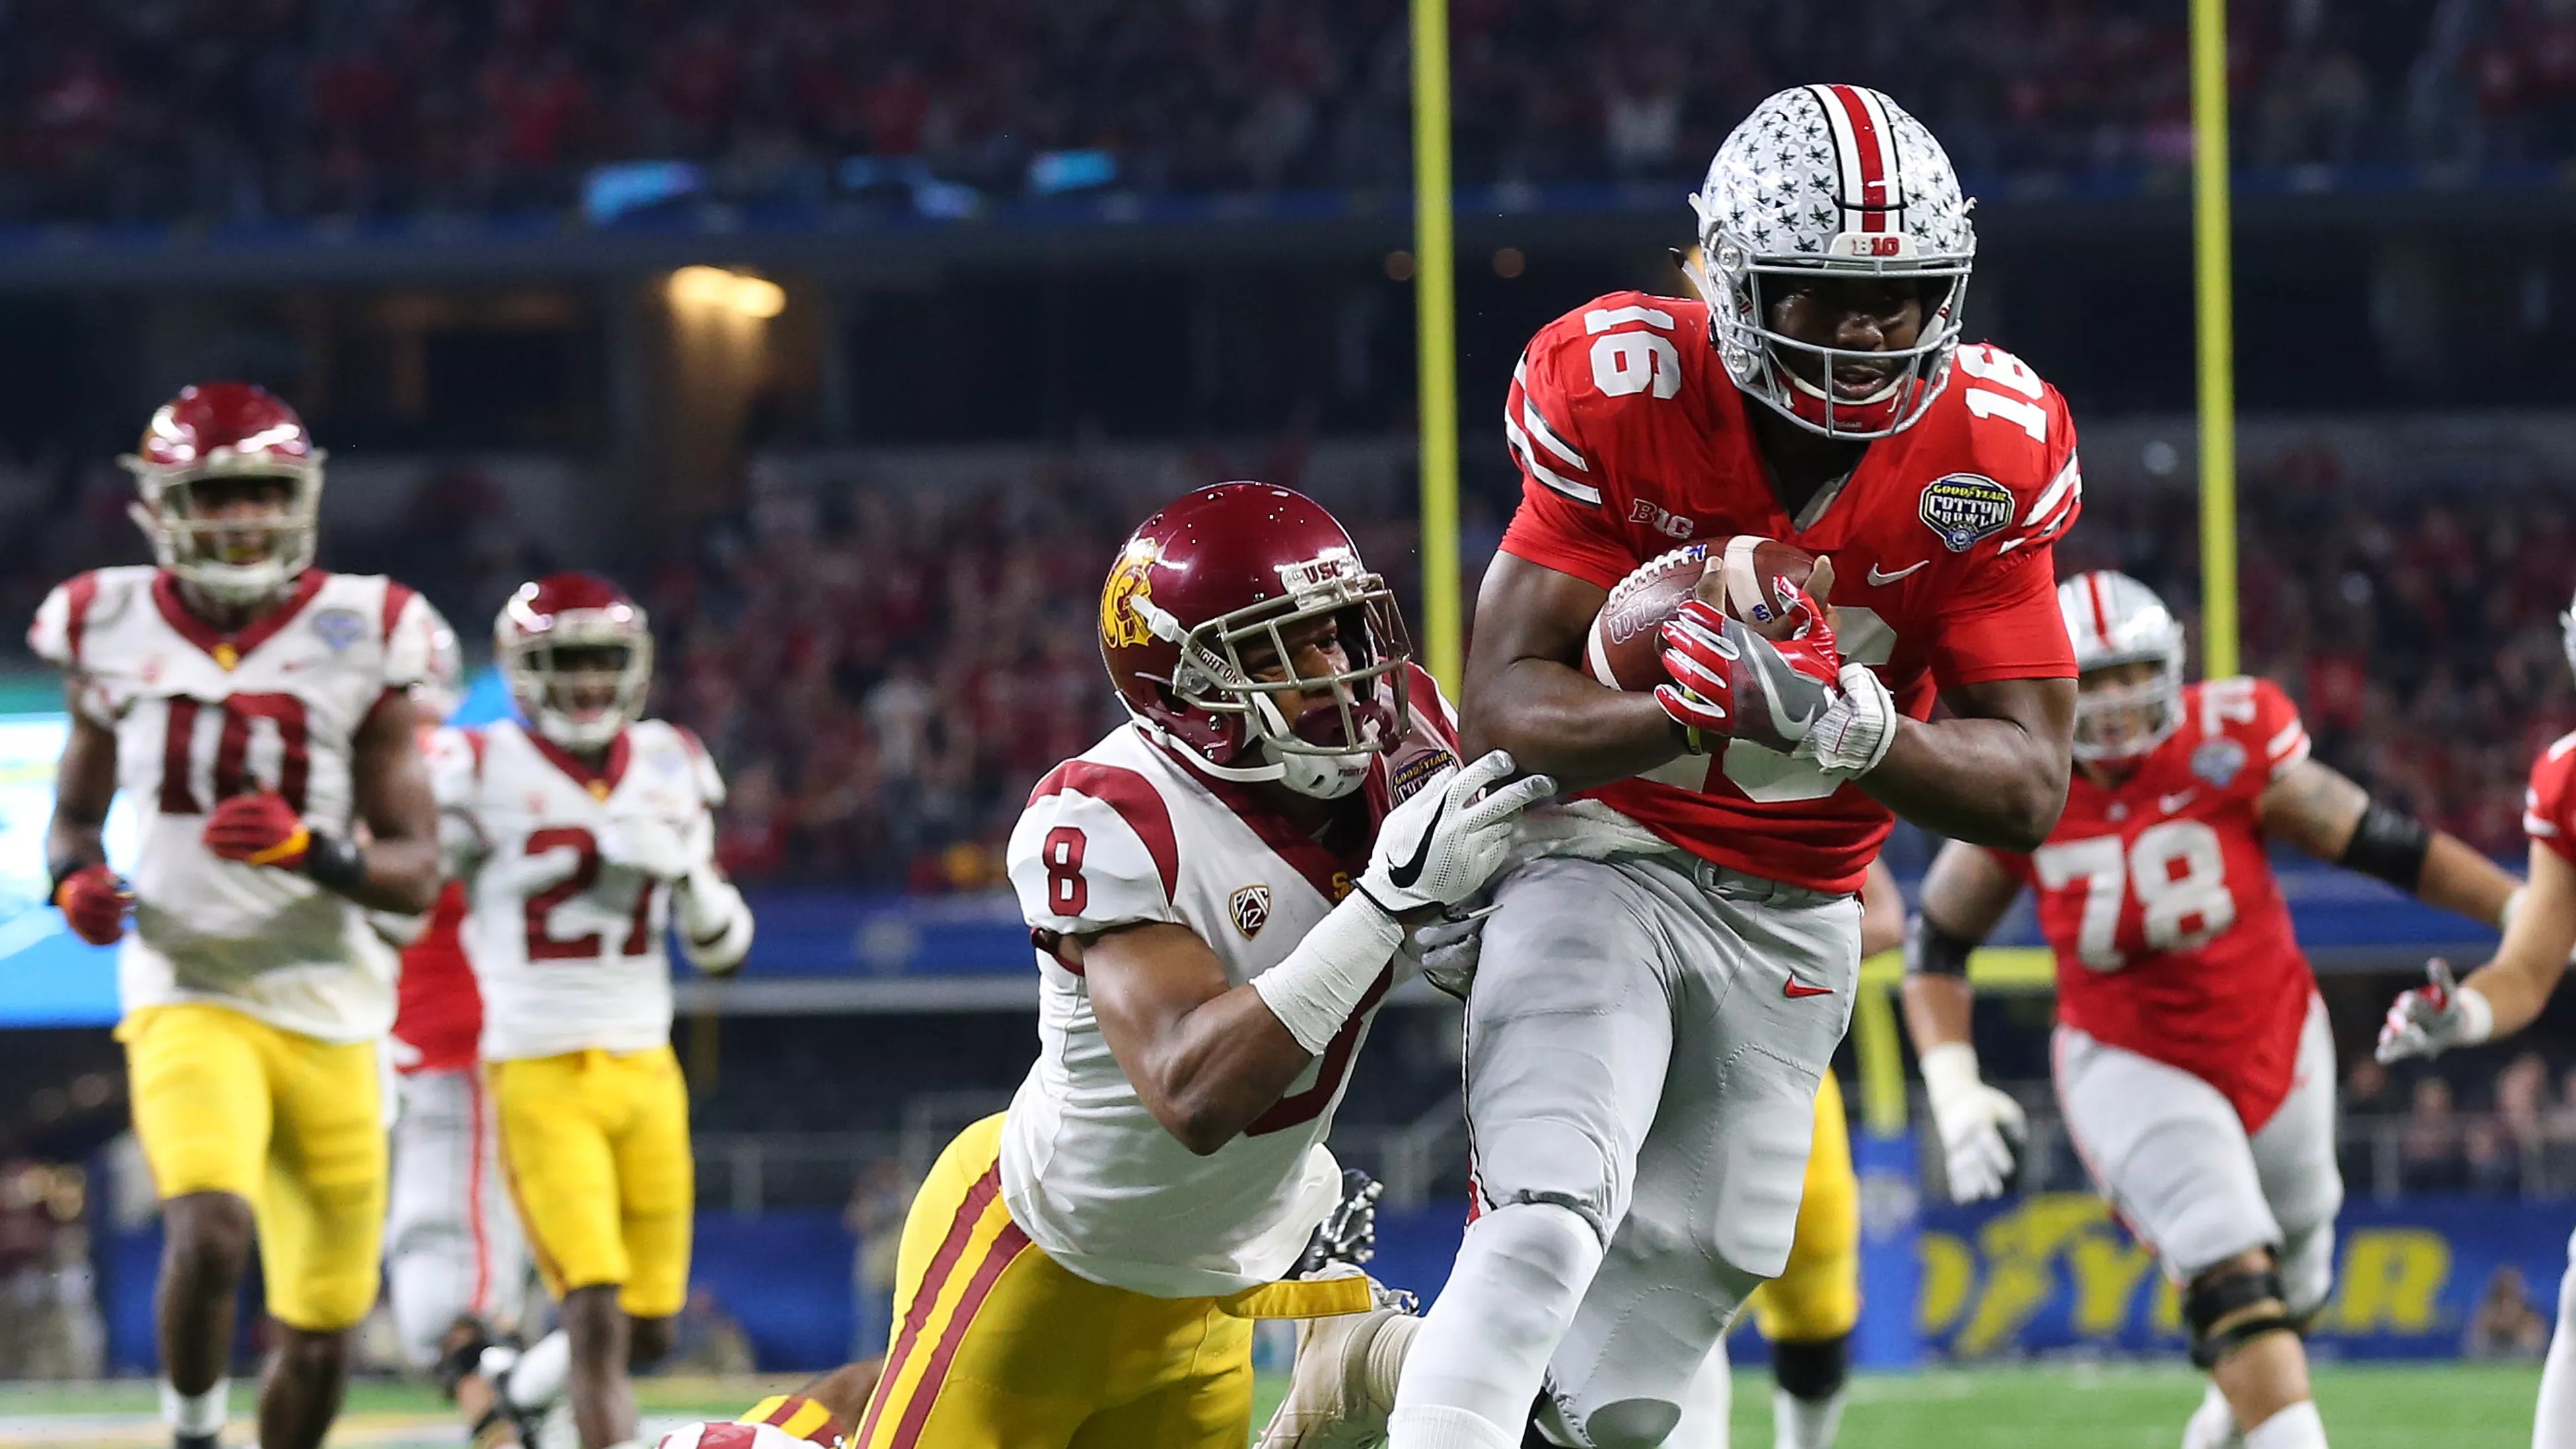 Ohio State uses huge first half to get past USC in Cotton Bowl, 247